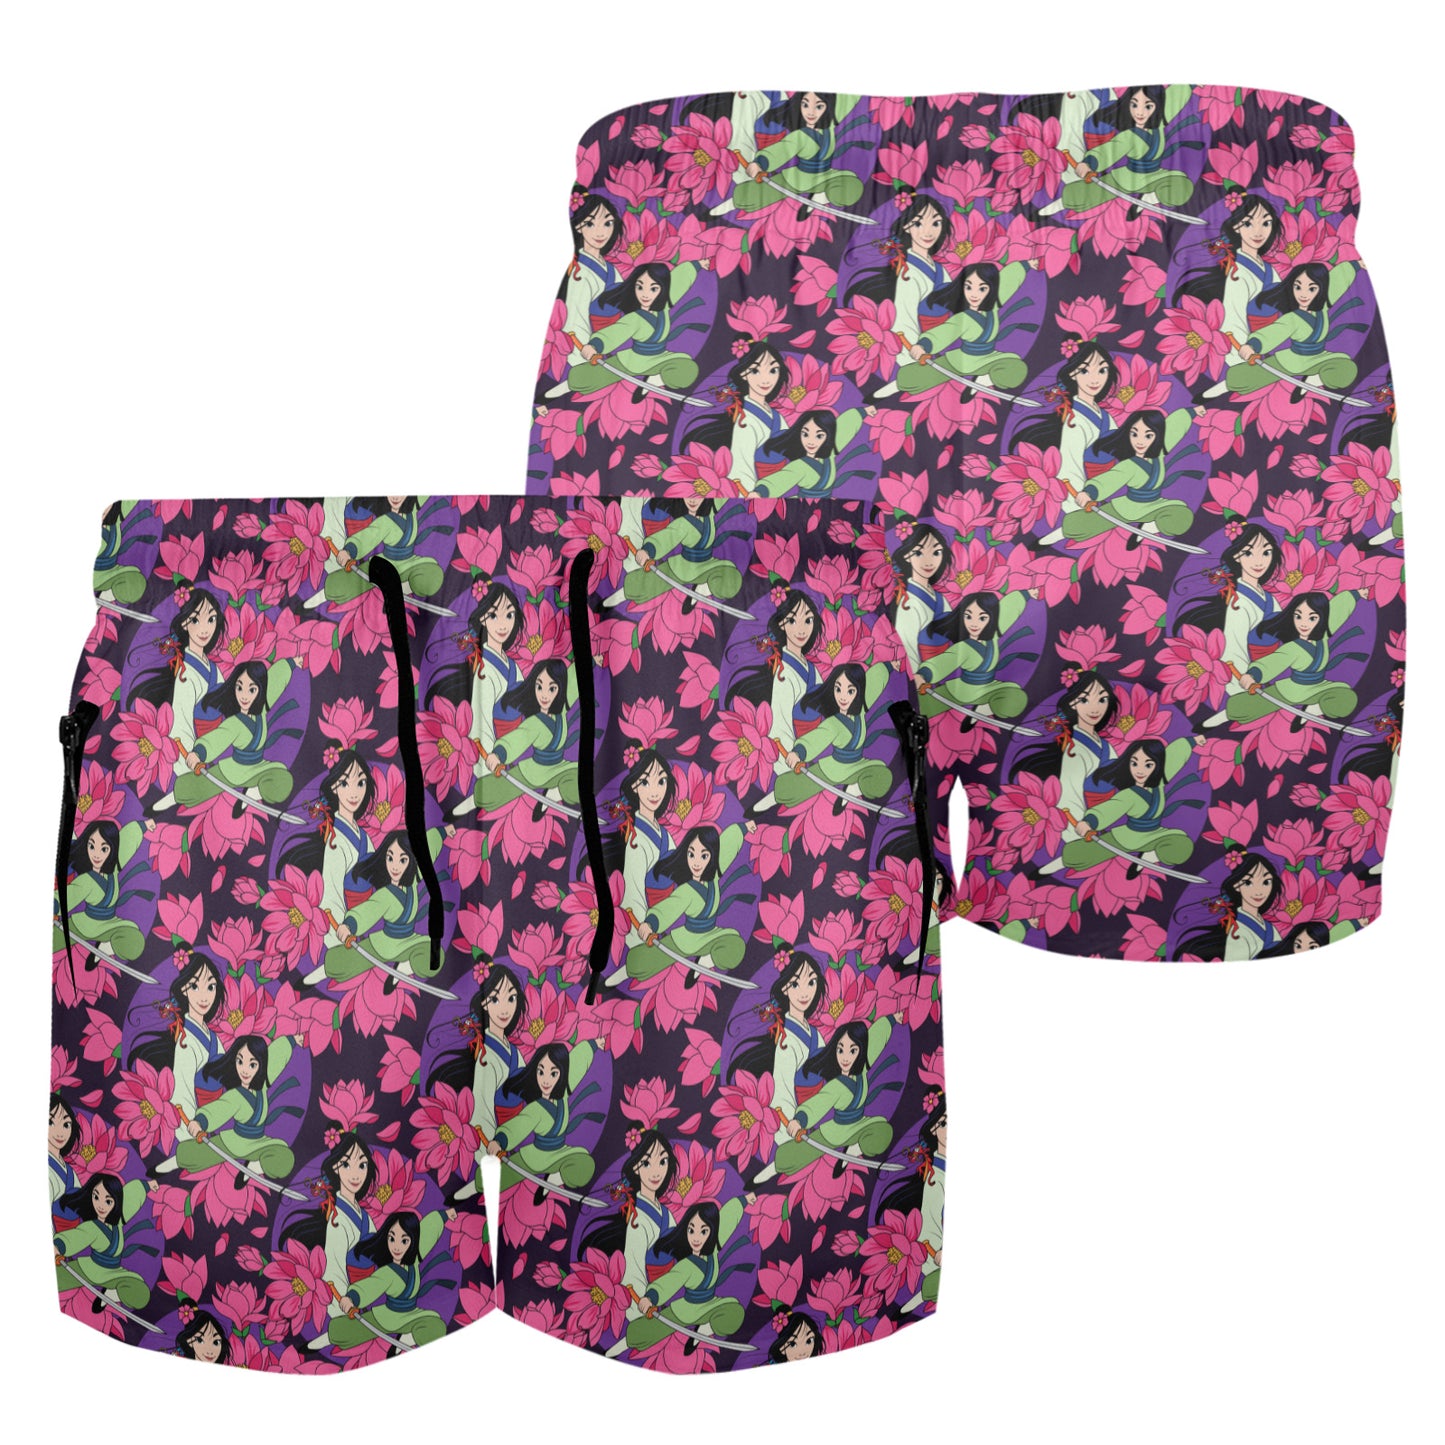 Blooming Flowers Men's Quick Dry Athletic Shorts